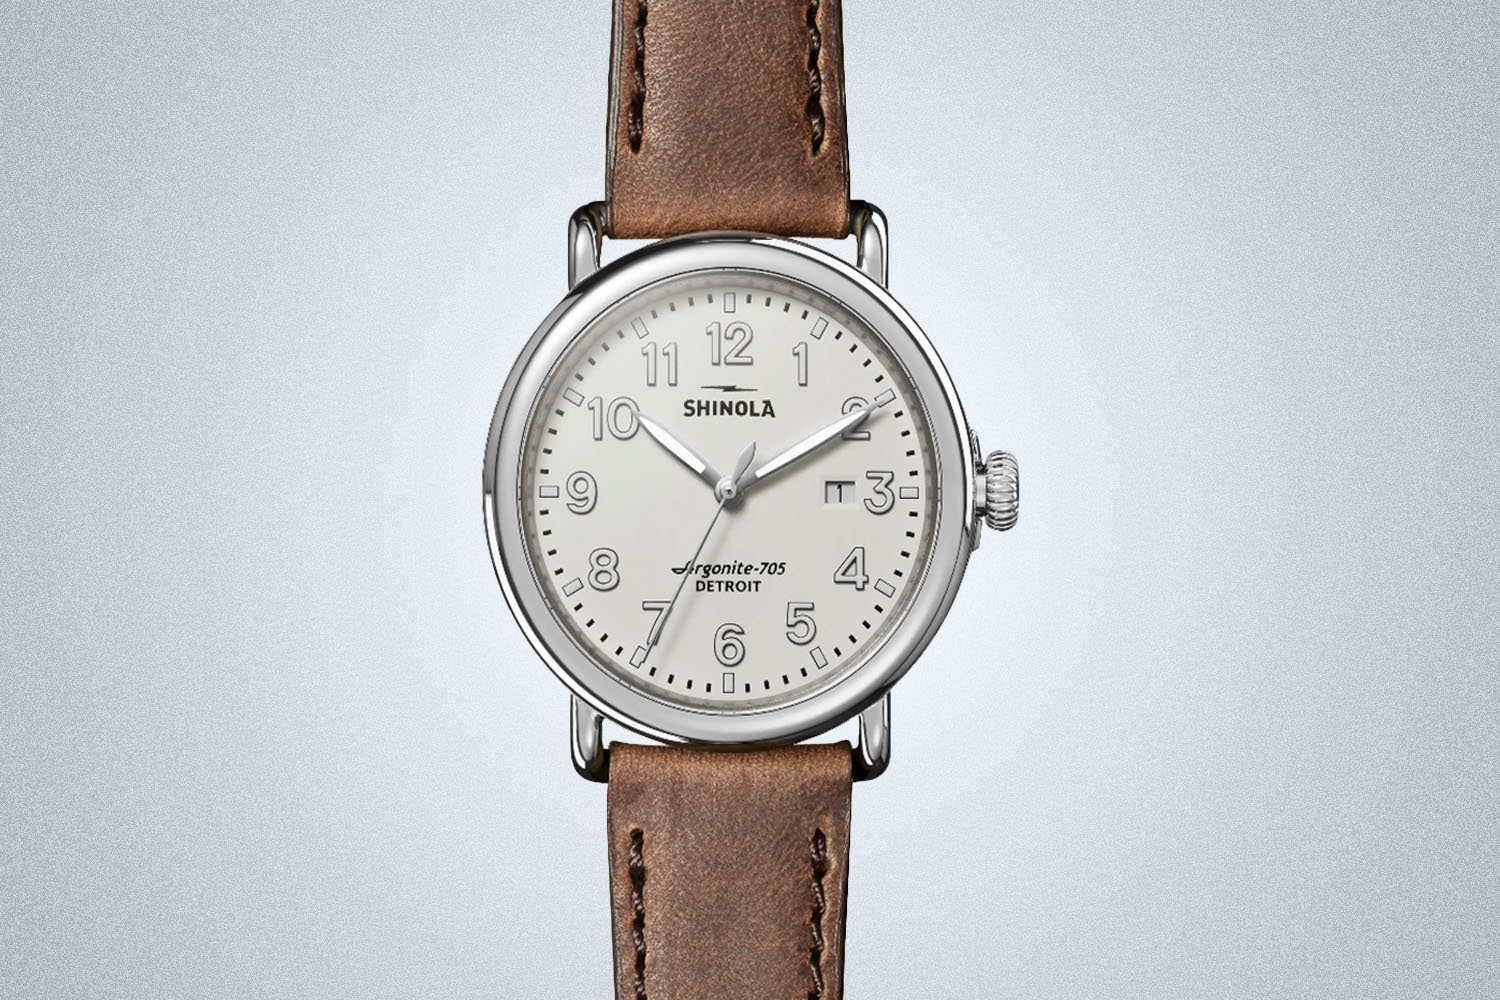 a borwn-leather strapped, silver watch from Shinola on a grey background